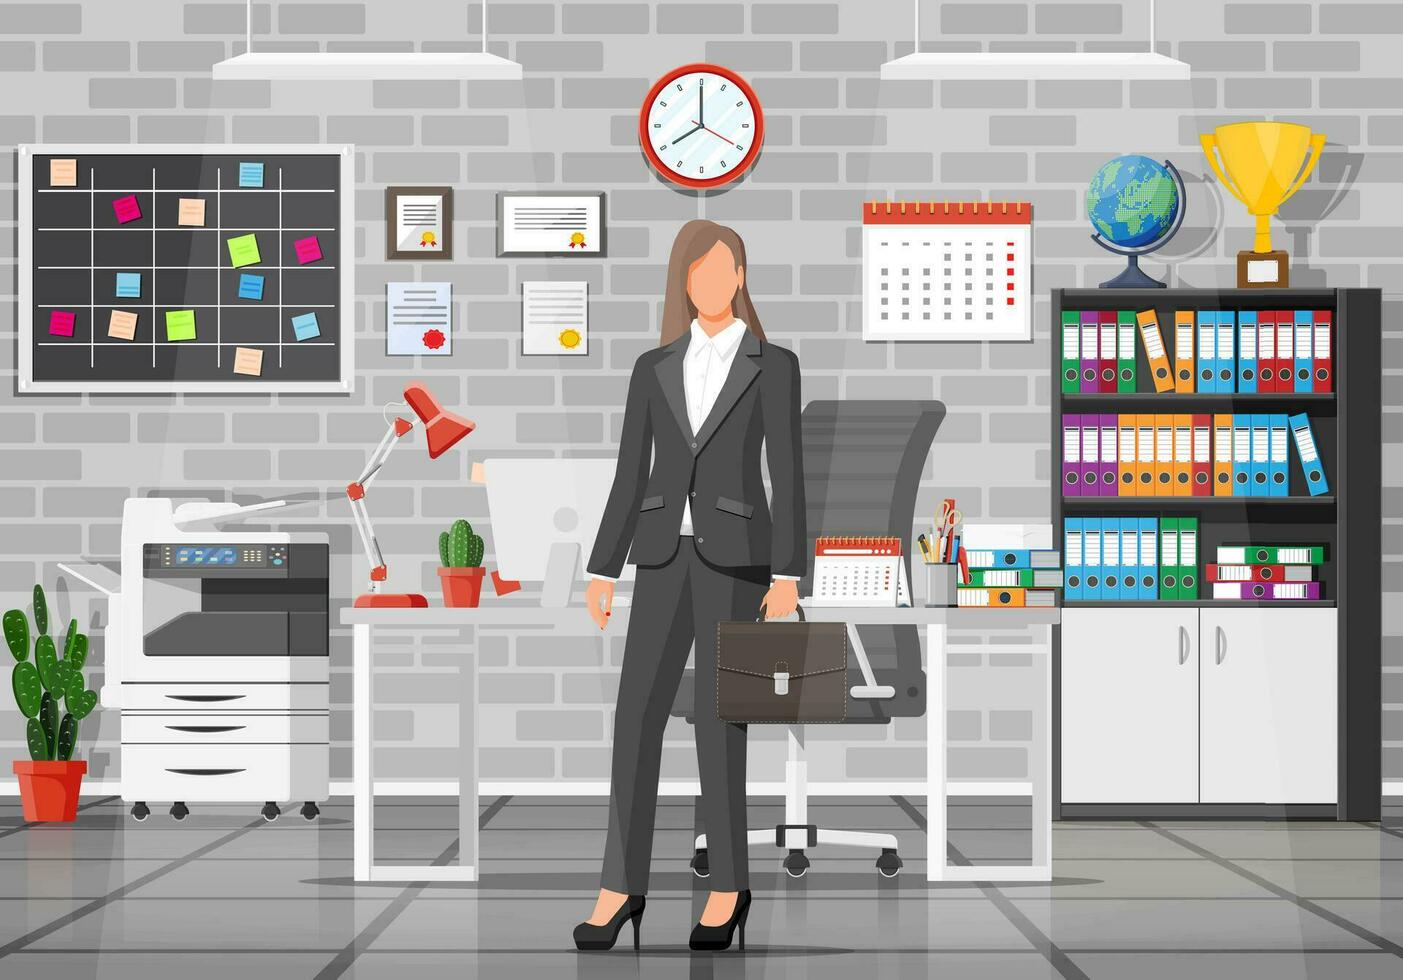 Office building interior. Businesswoman at desk with computer, chair, lamp, books and document papers. Drawer, tree, clocks, calendar, printer. Modern business workplace. Flat vector illustration